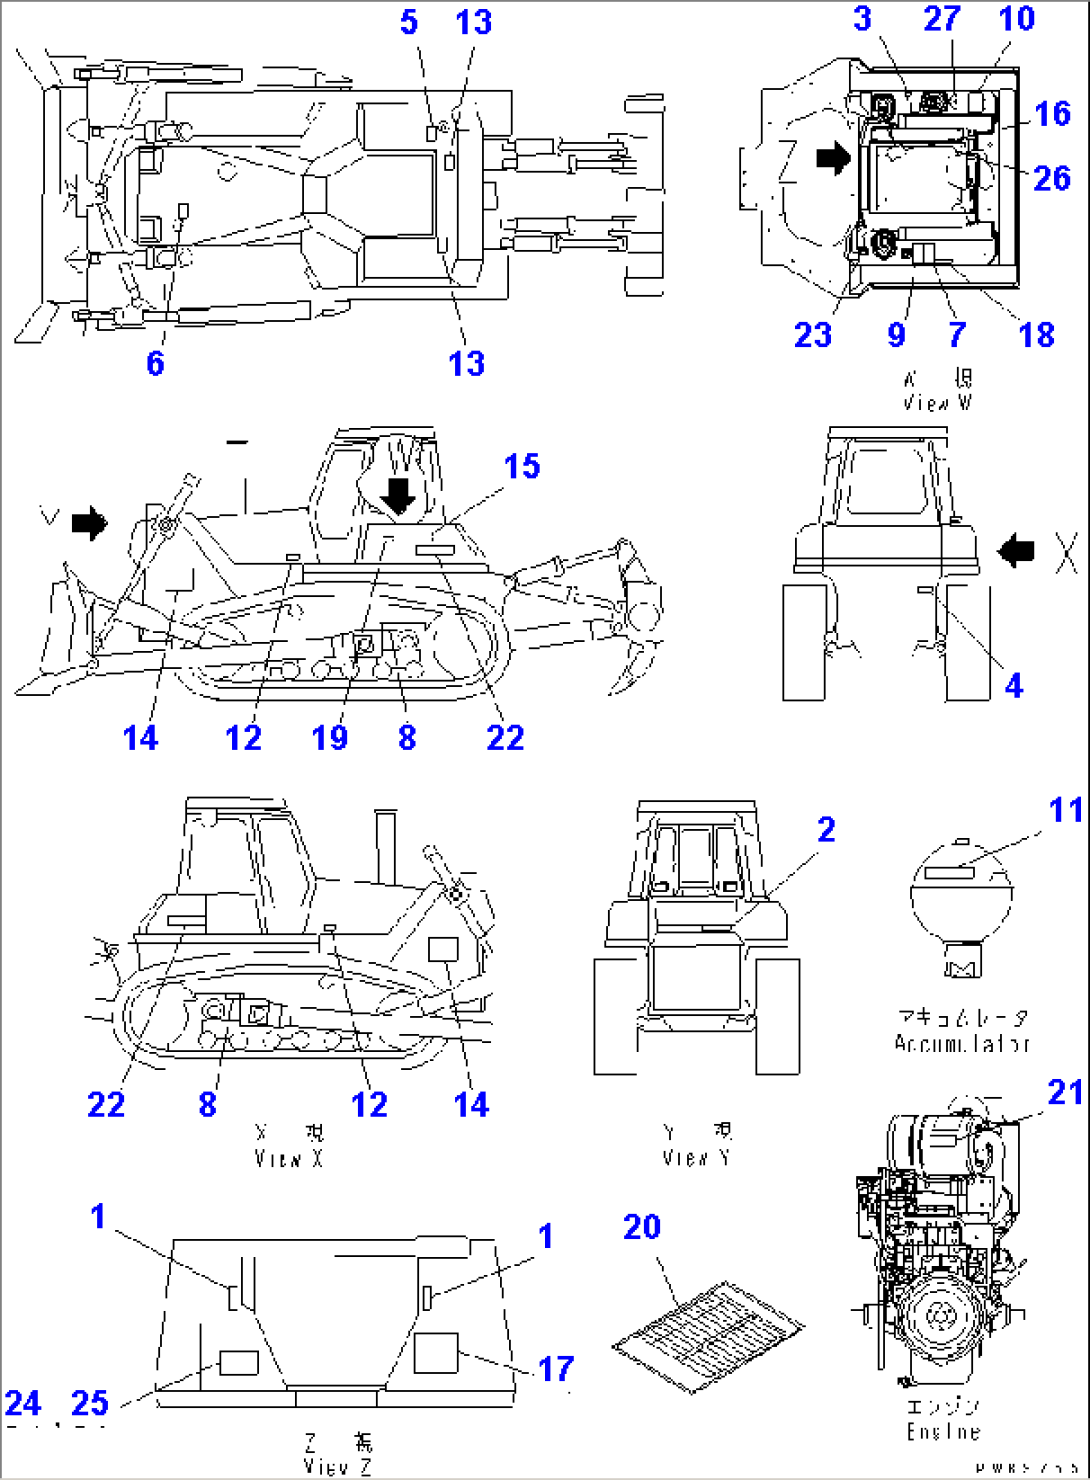 MARKS AND PLATES (ENGLISH)(#70001-74999)